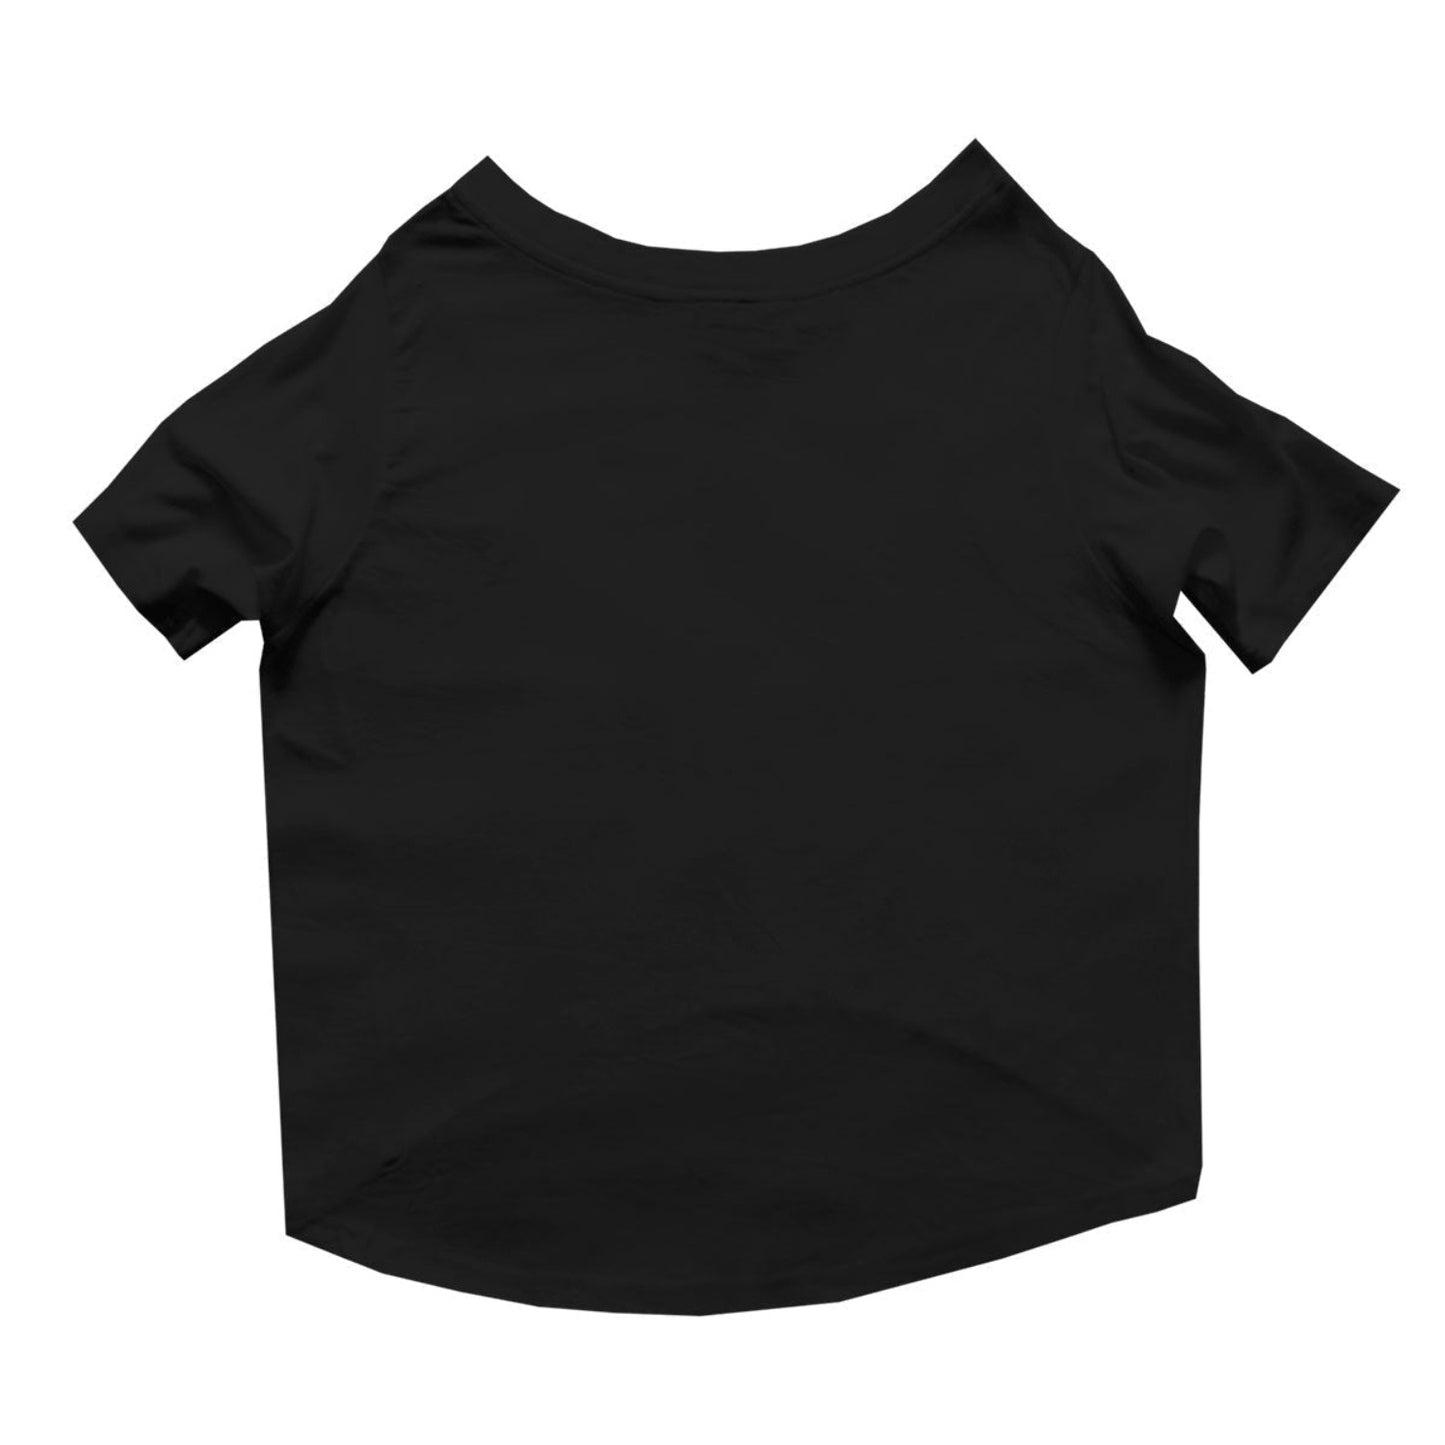 Ruse / can-i-play-with-your-human-crew-neck-dog-tee / Black